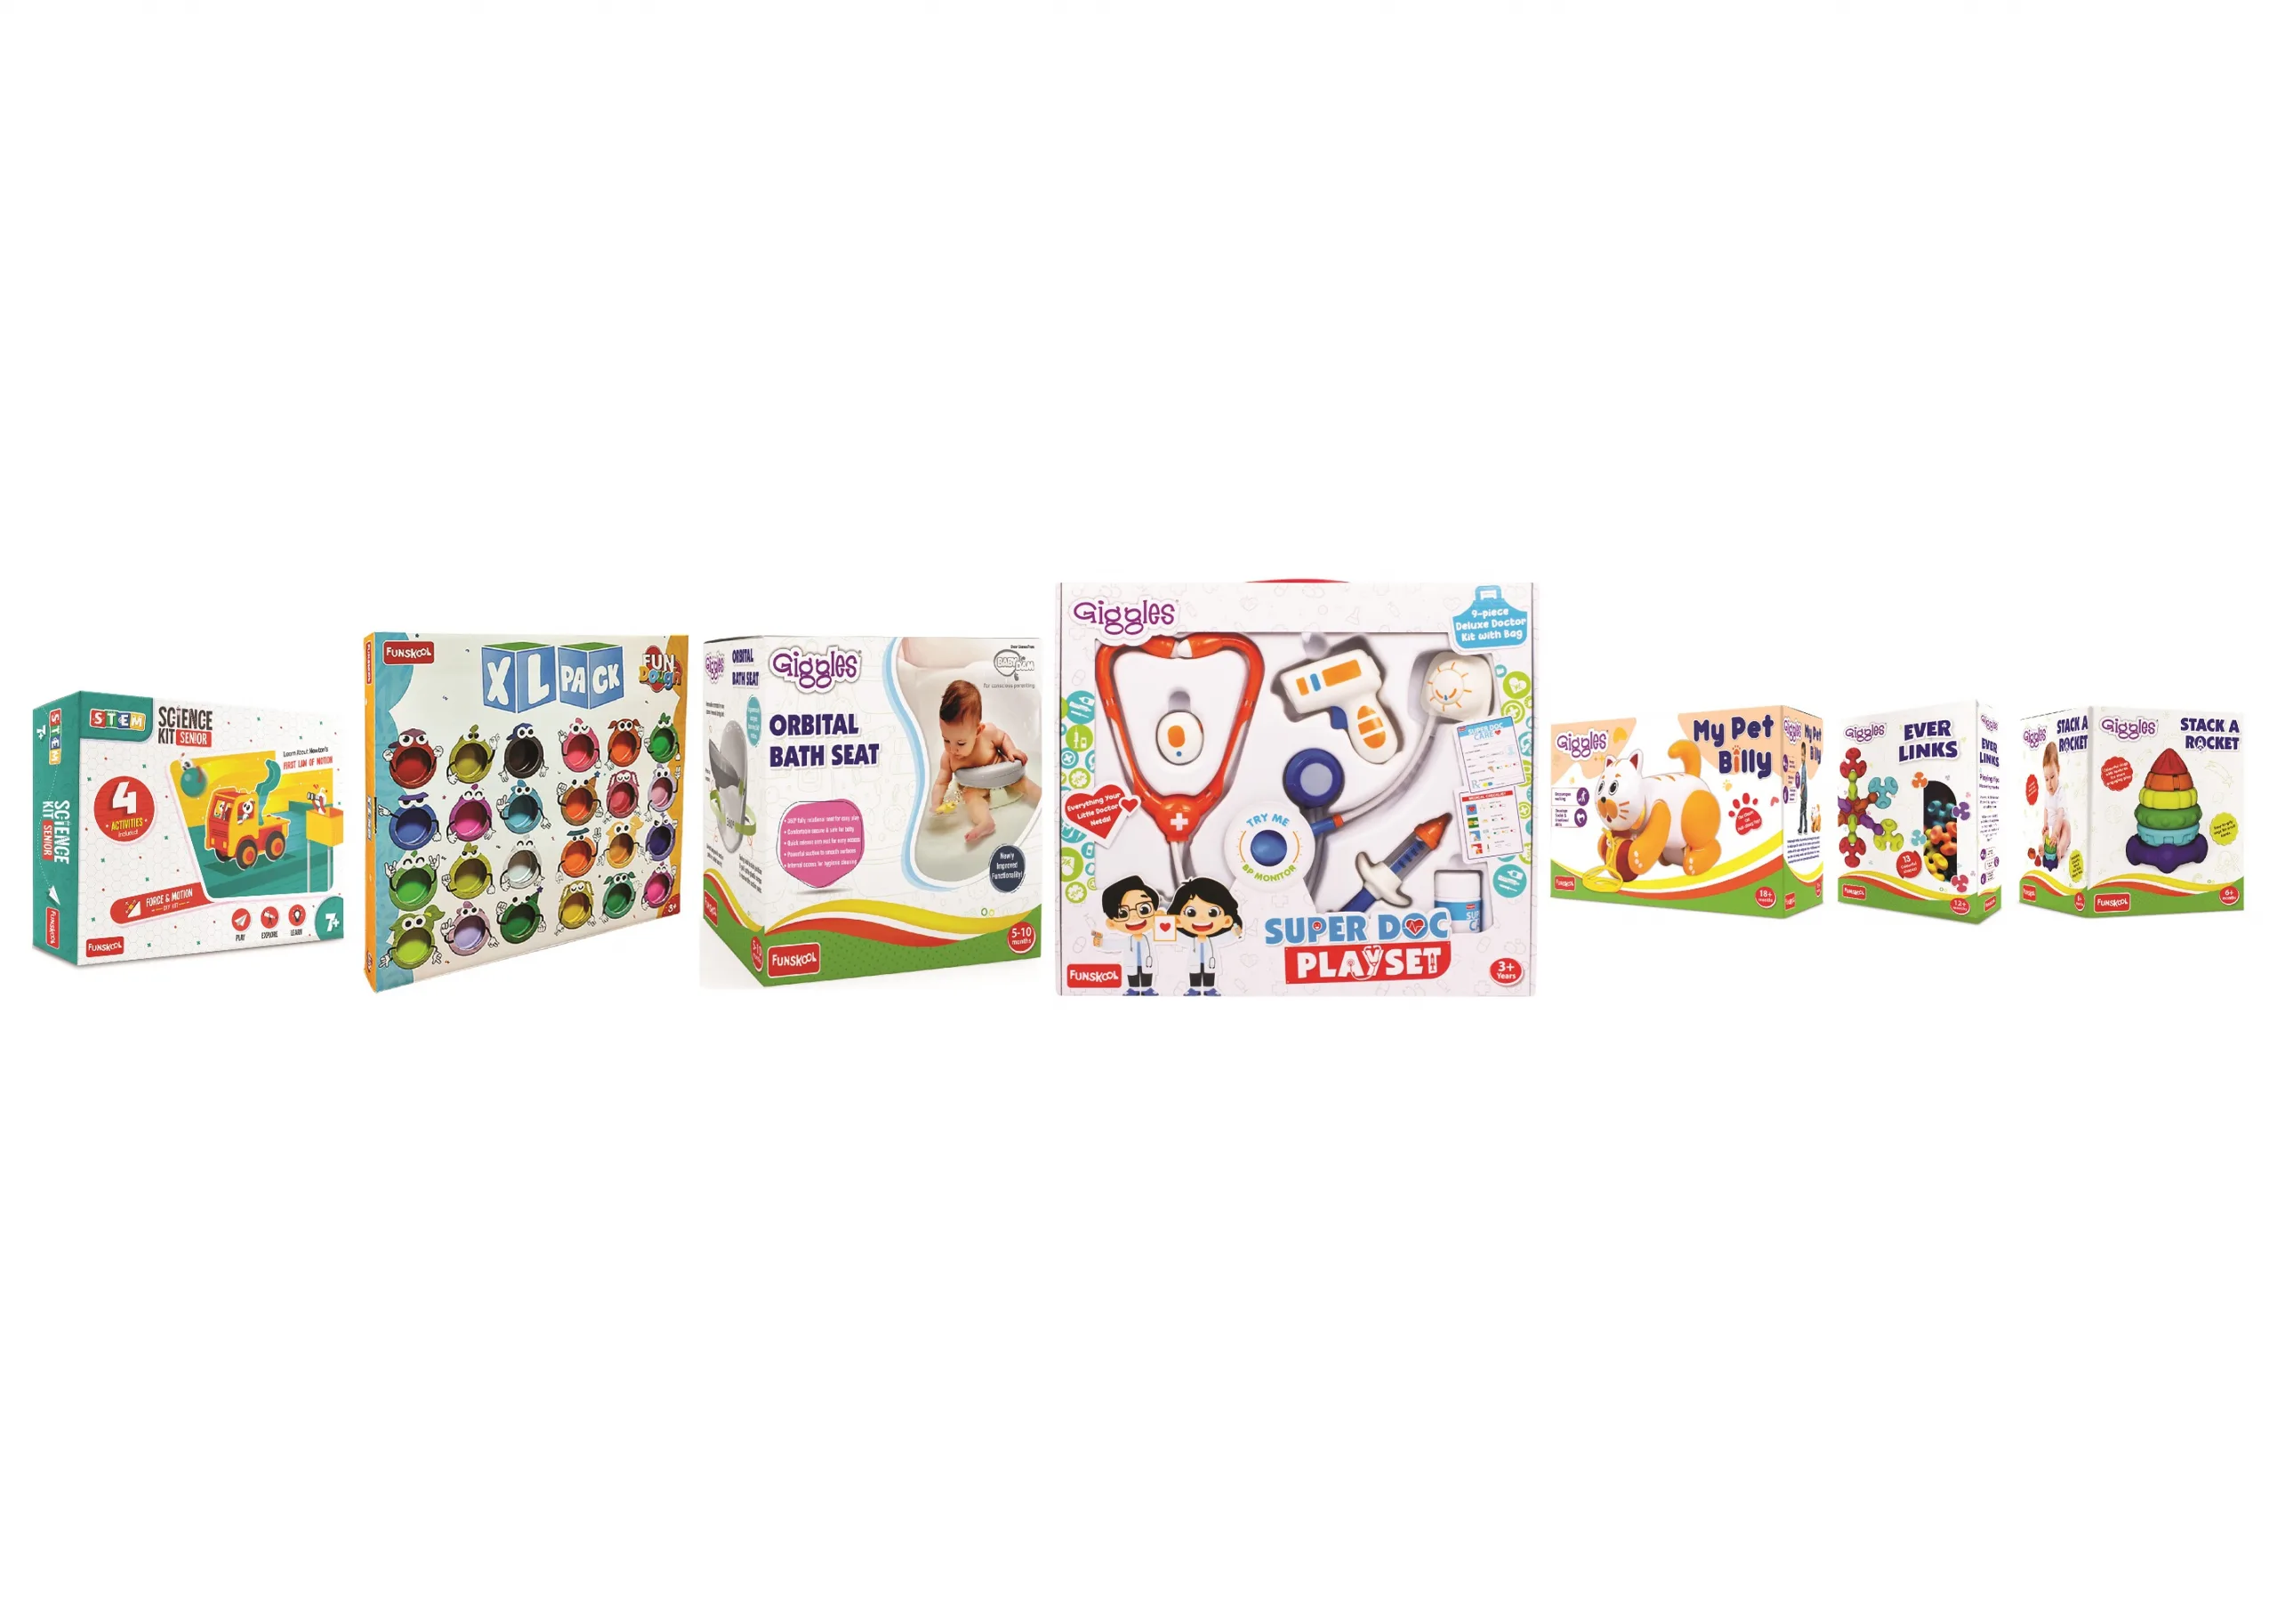 Funskool launches exclusive range of toys and baby care products